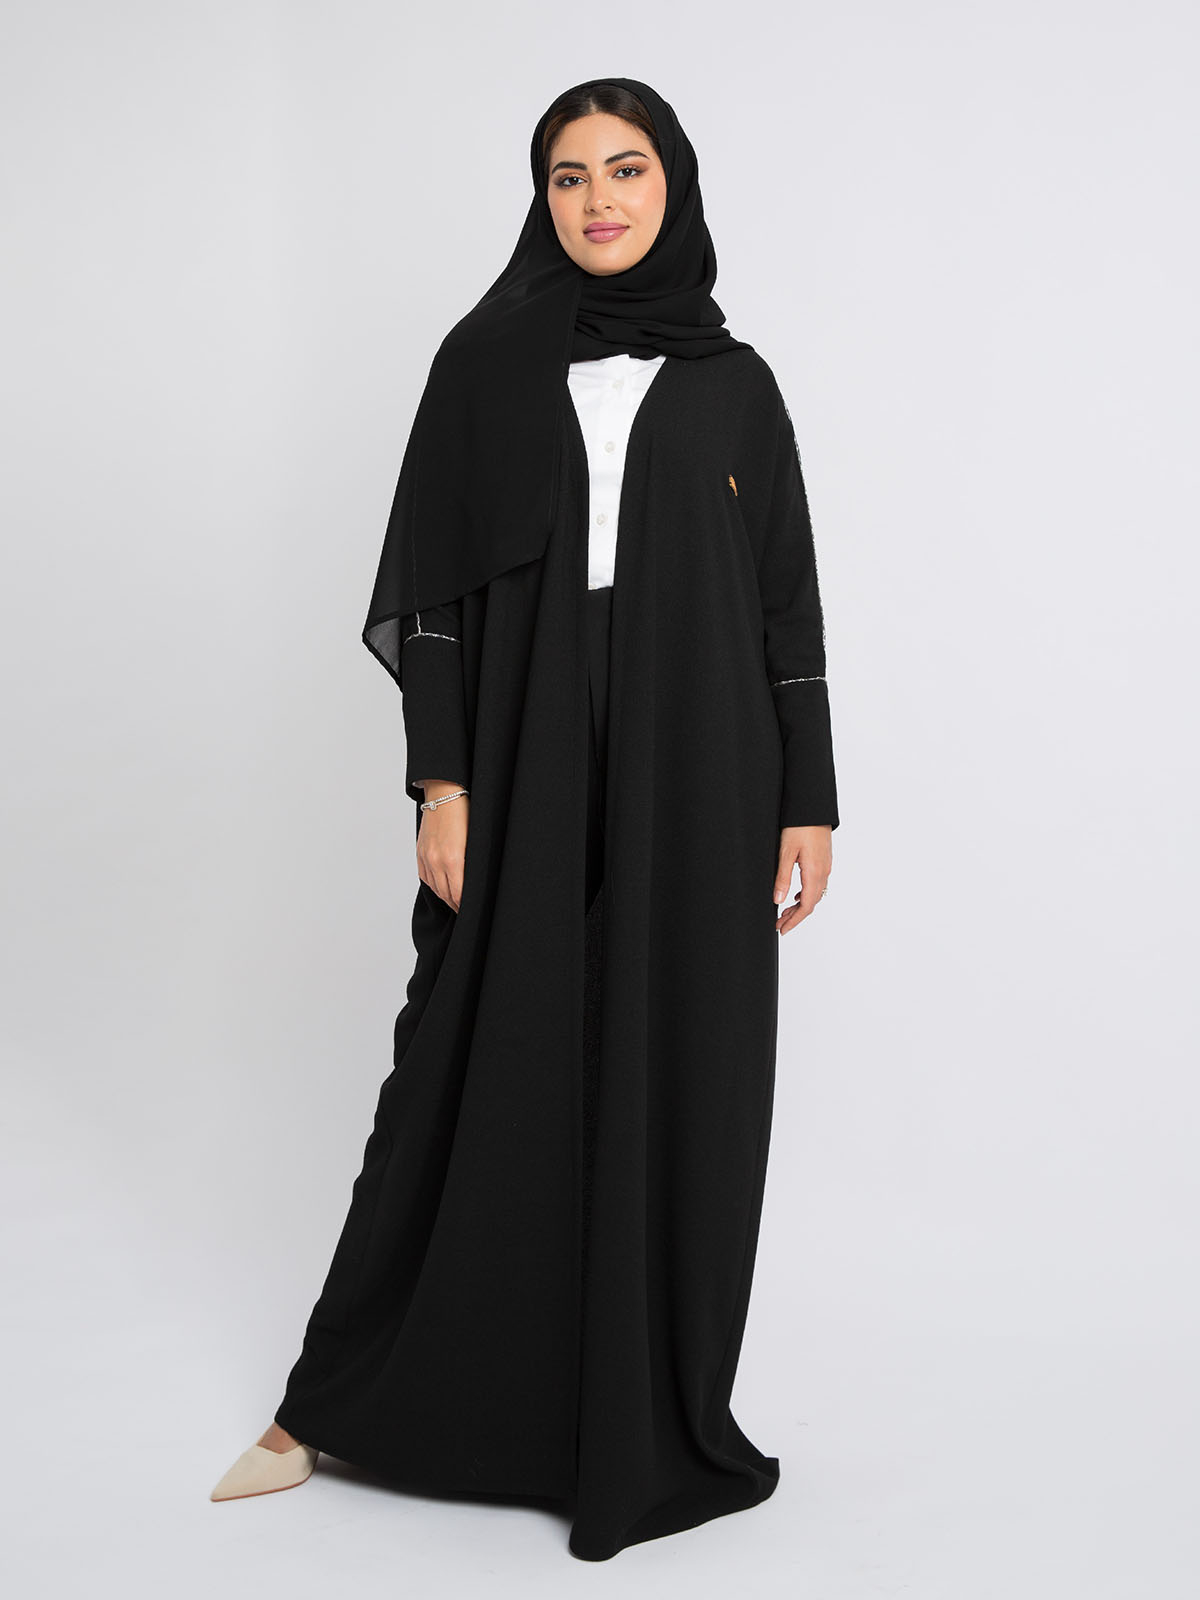 Kaafmeem women clothing half bisht firefly abaya black color in crepe fabric for daily use